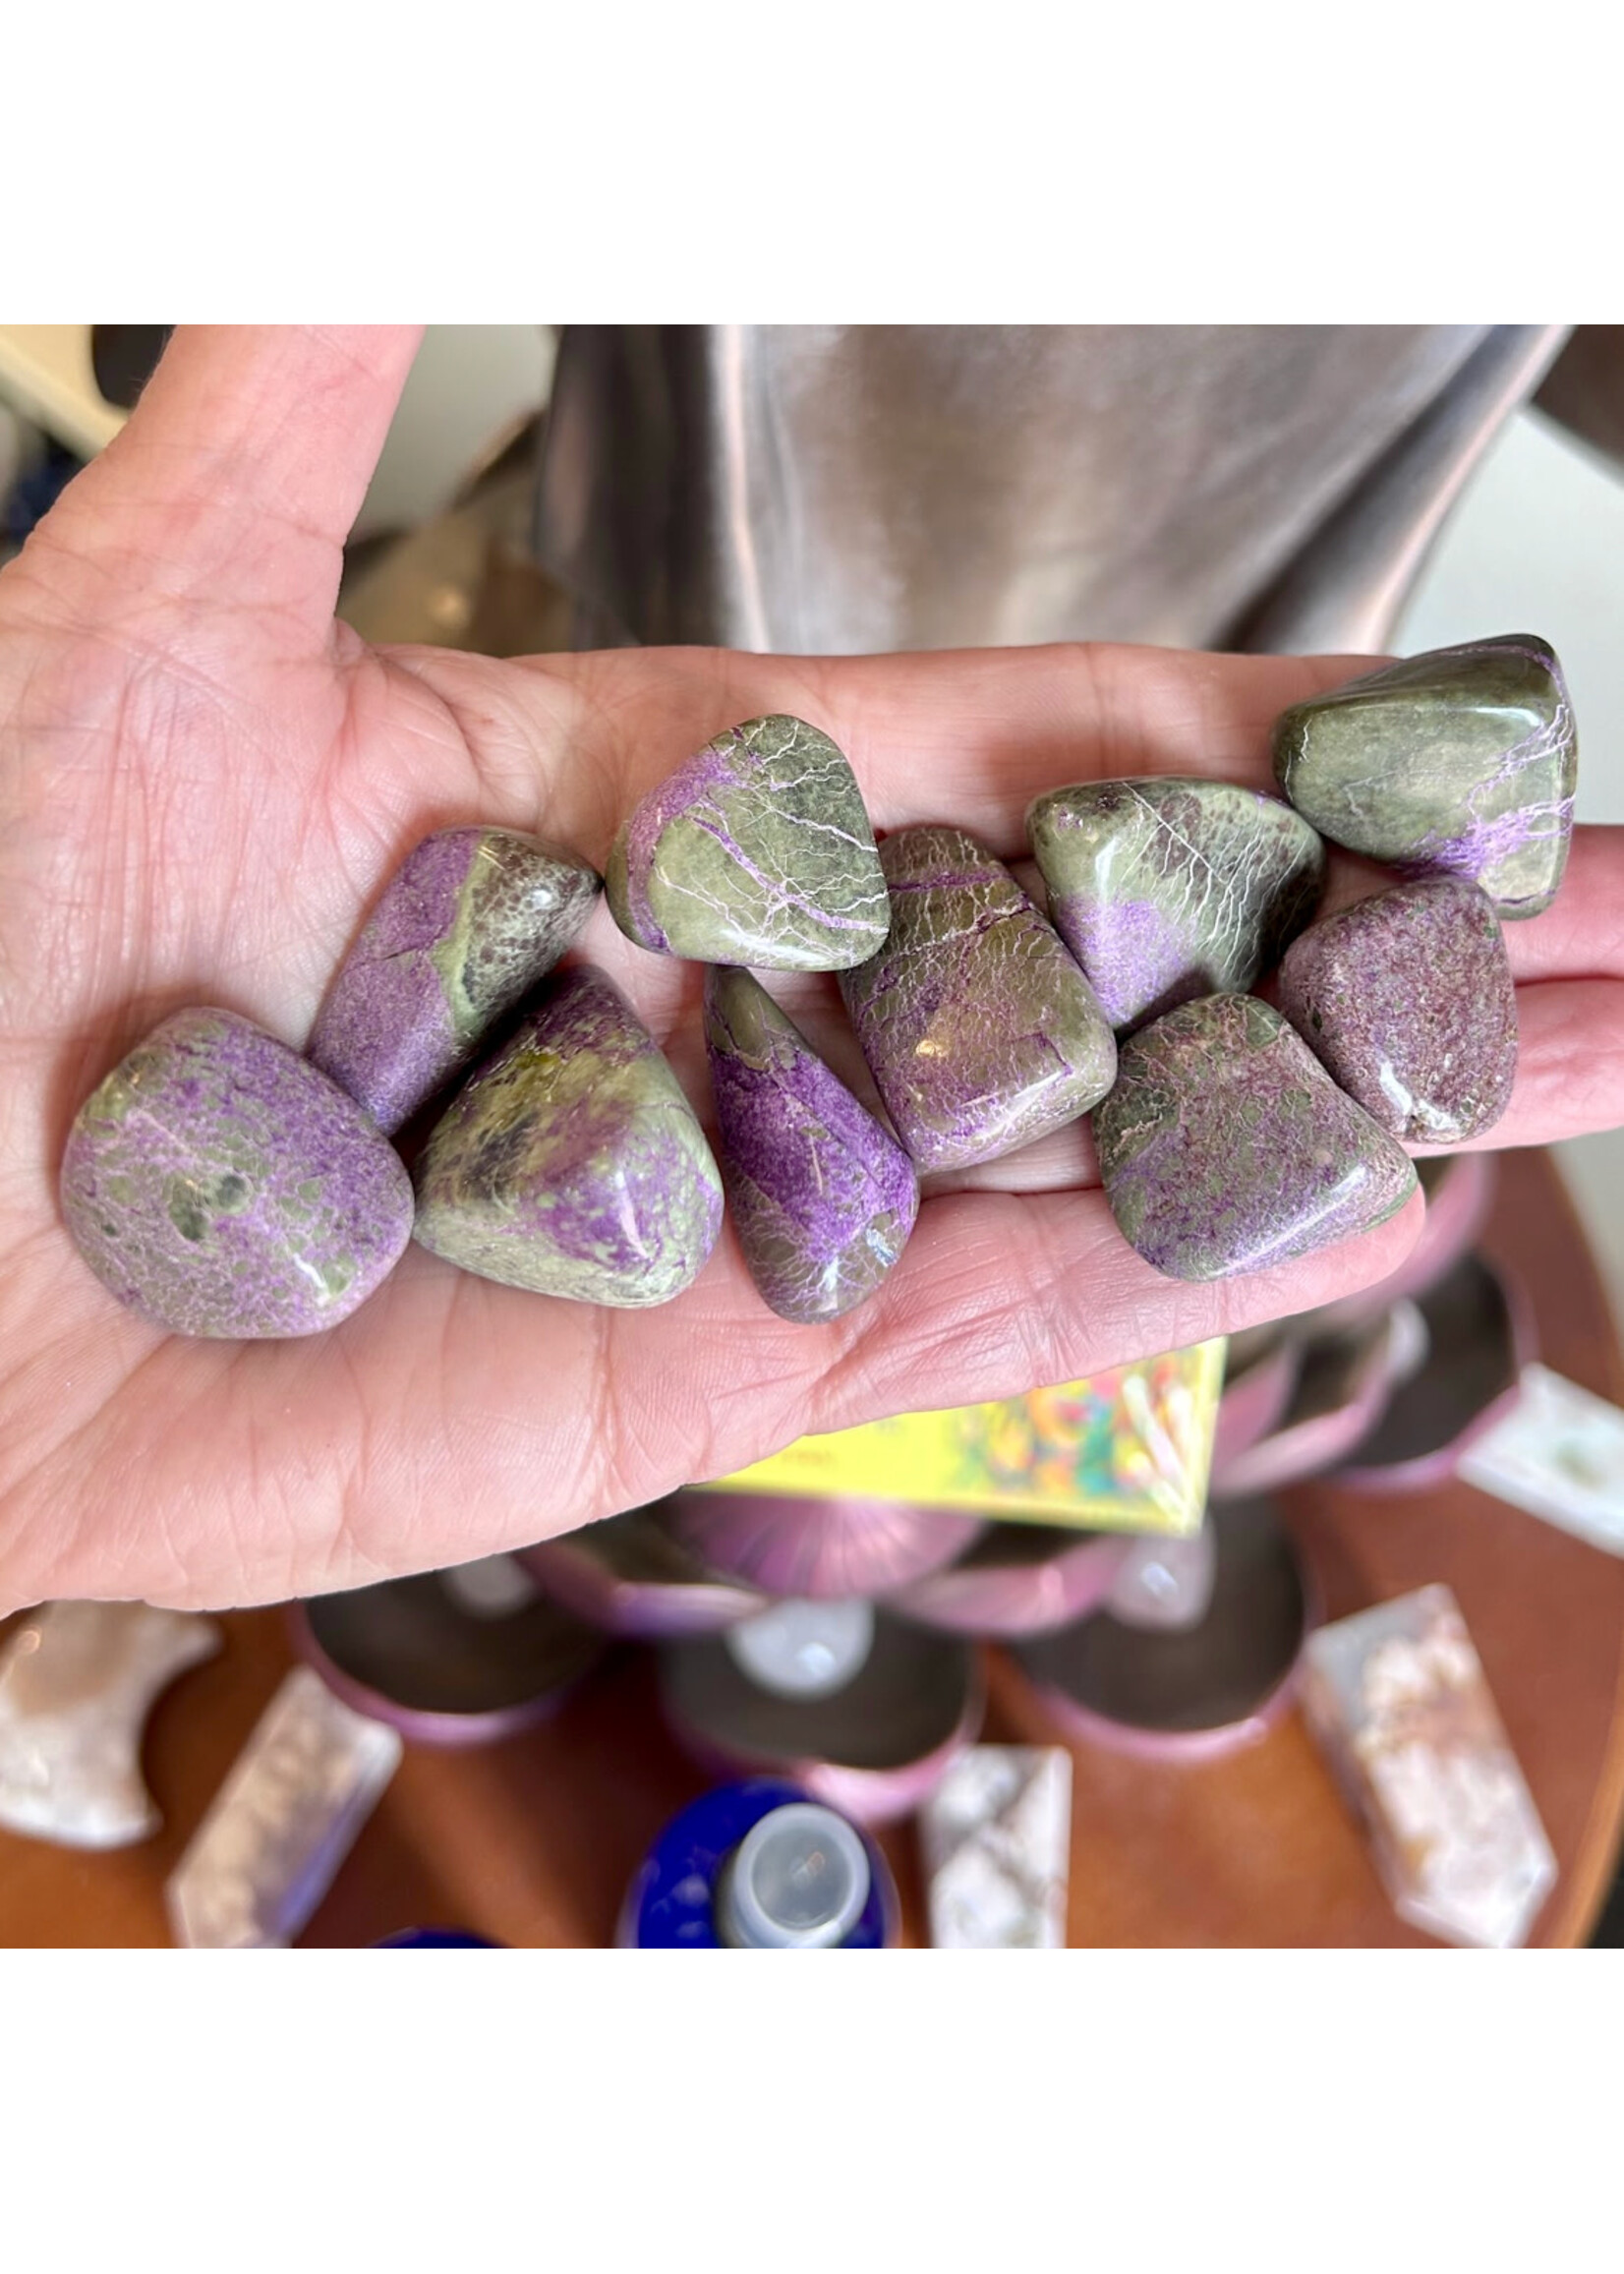 Atlantisite Polished for Reconnecting to Ancient Wisdom